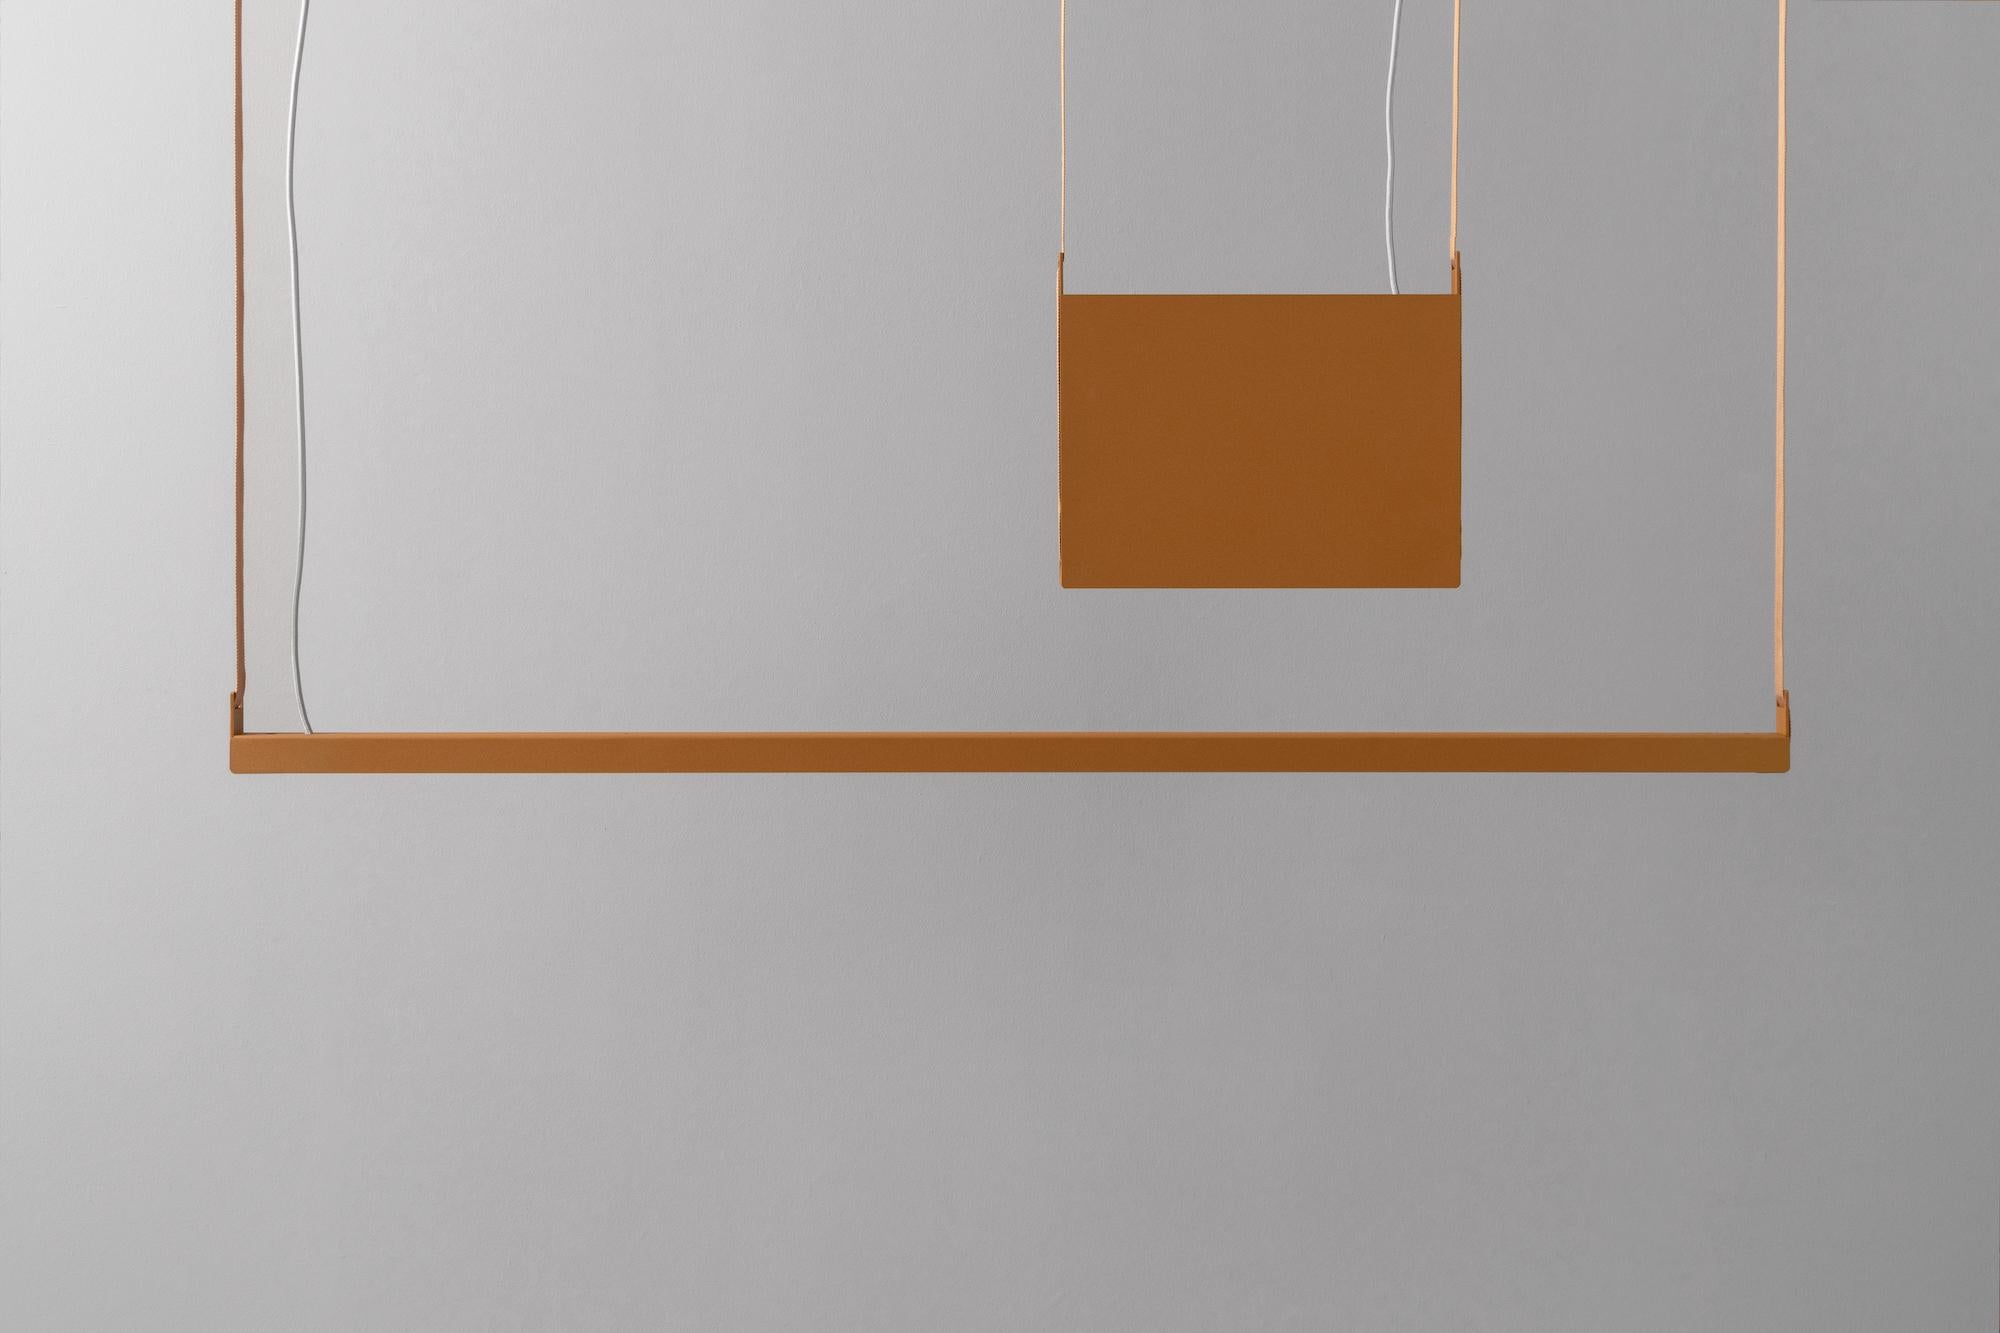 BLT_1 Almond Pendant Lamp by +kouple
Dimensions: D 121,6 x W 3,4 x H 4 cm. 
Materials: Powder-coated steel and textile.

Available in different color options. The rod length is 250 cm. Please contact us.

All our lamps can be wired according to each